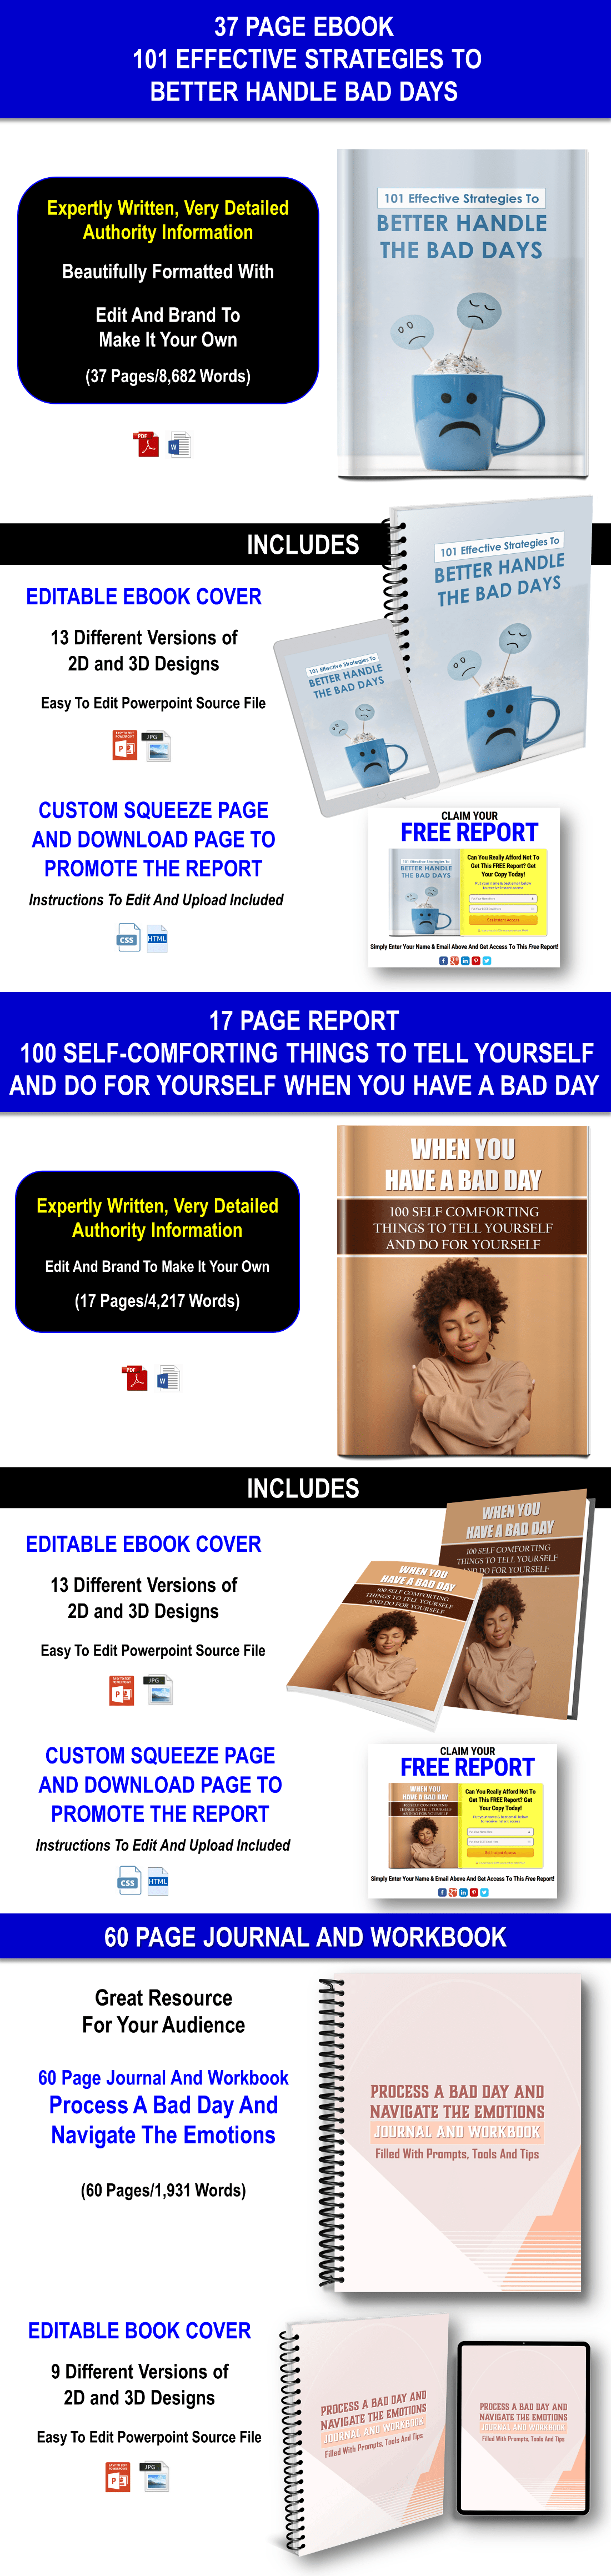 101 Effective Strategies To Better Handle Those Bad Days Content Pack with PLR Rights